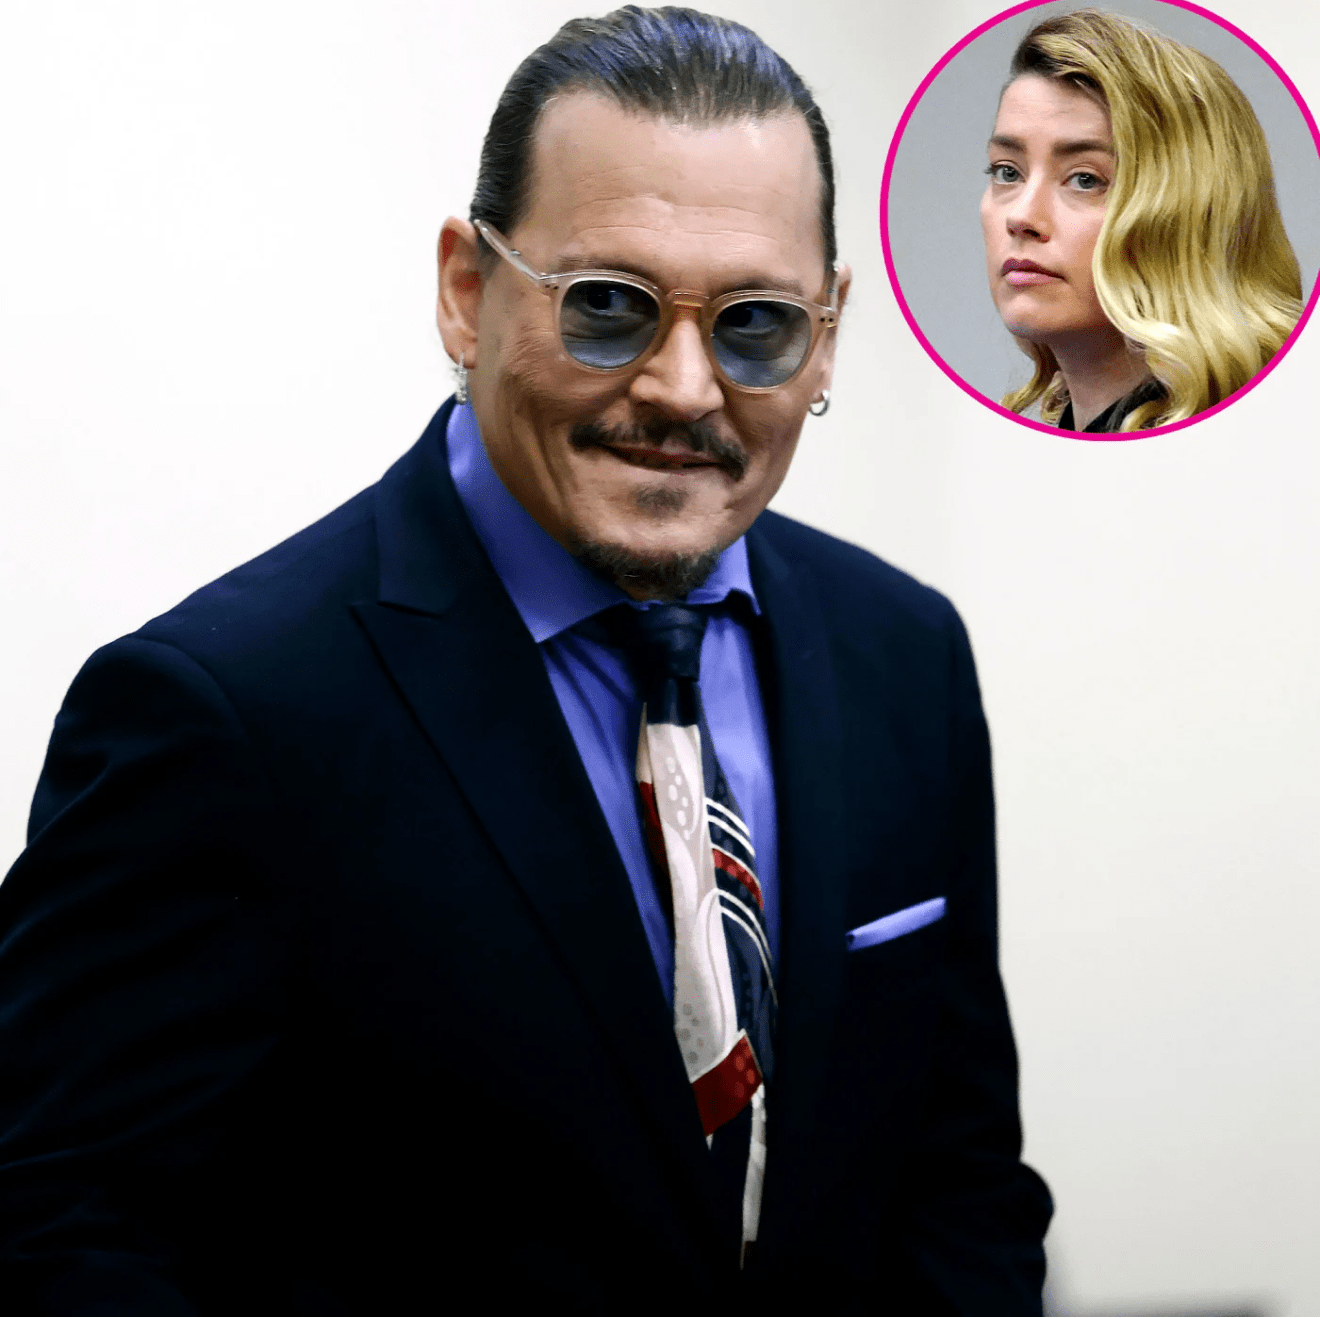 Johnny Depp makes huge announcement after winning case against Amber Heard